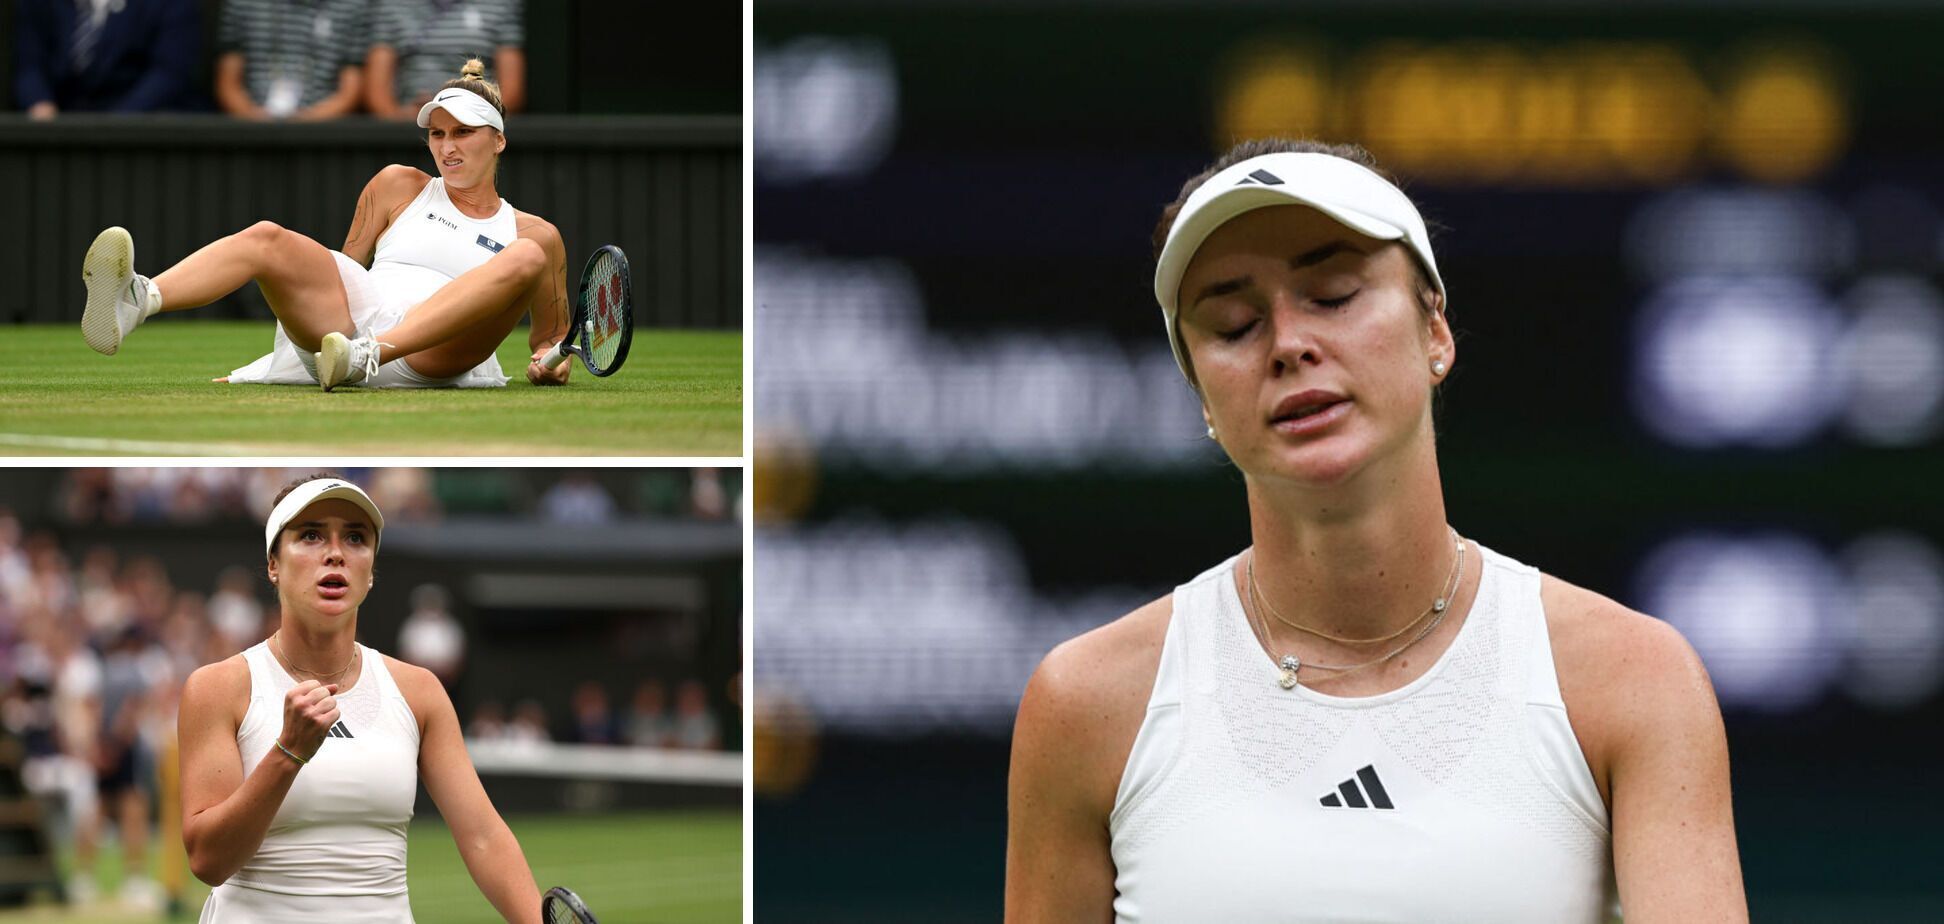 Svitolina leaves centre court in tears at Wimbledon. Video